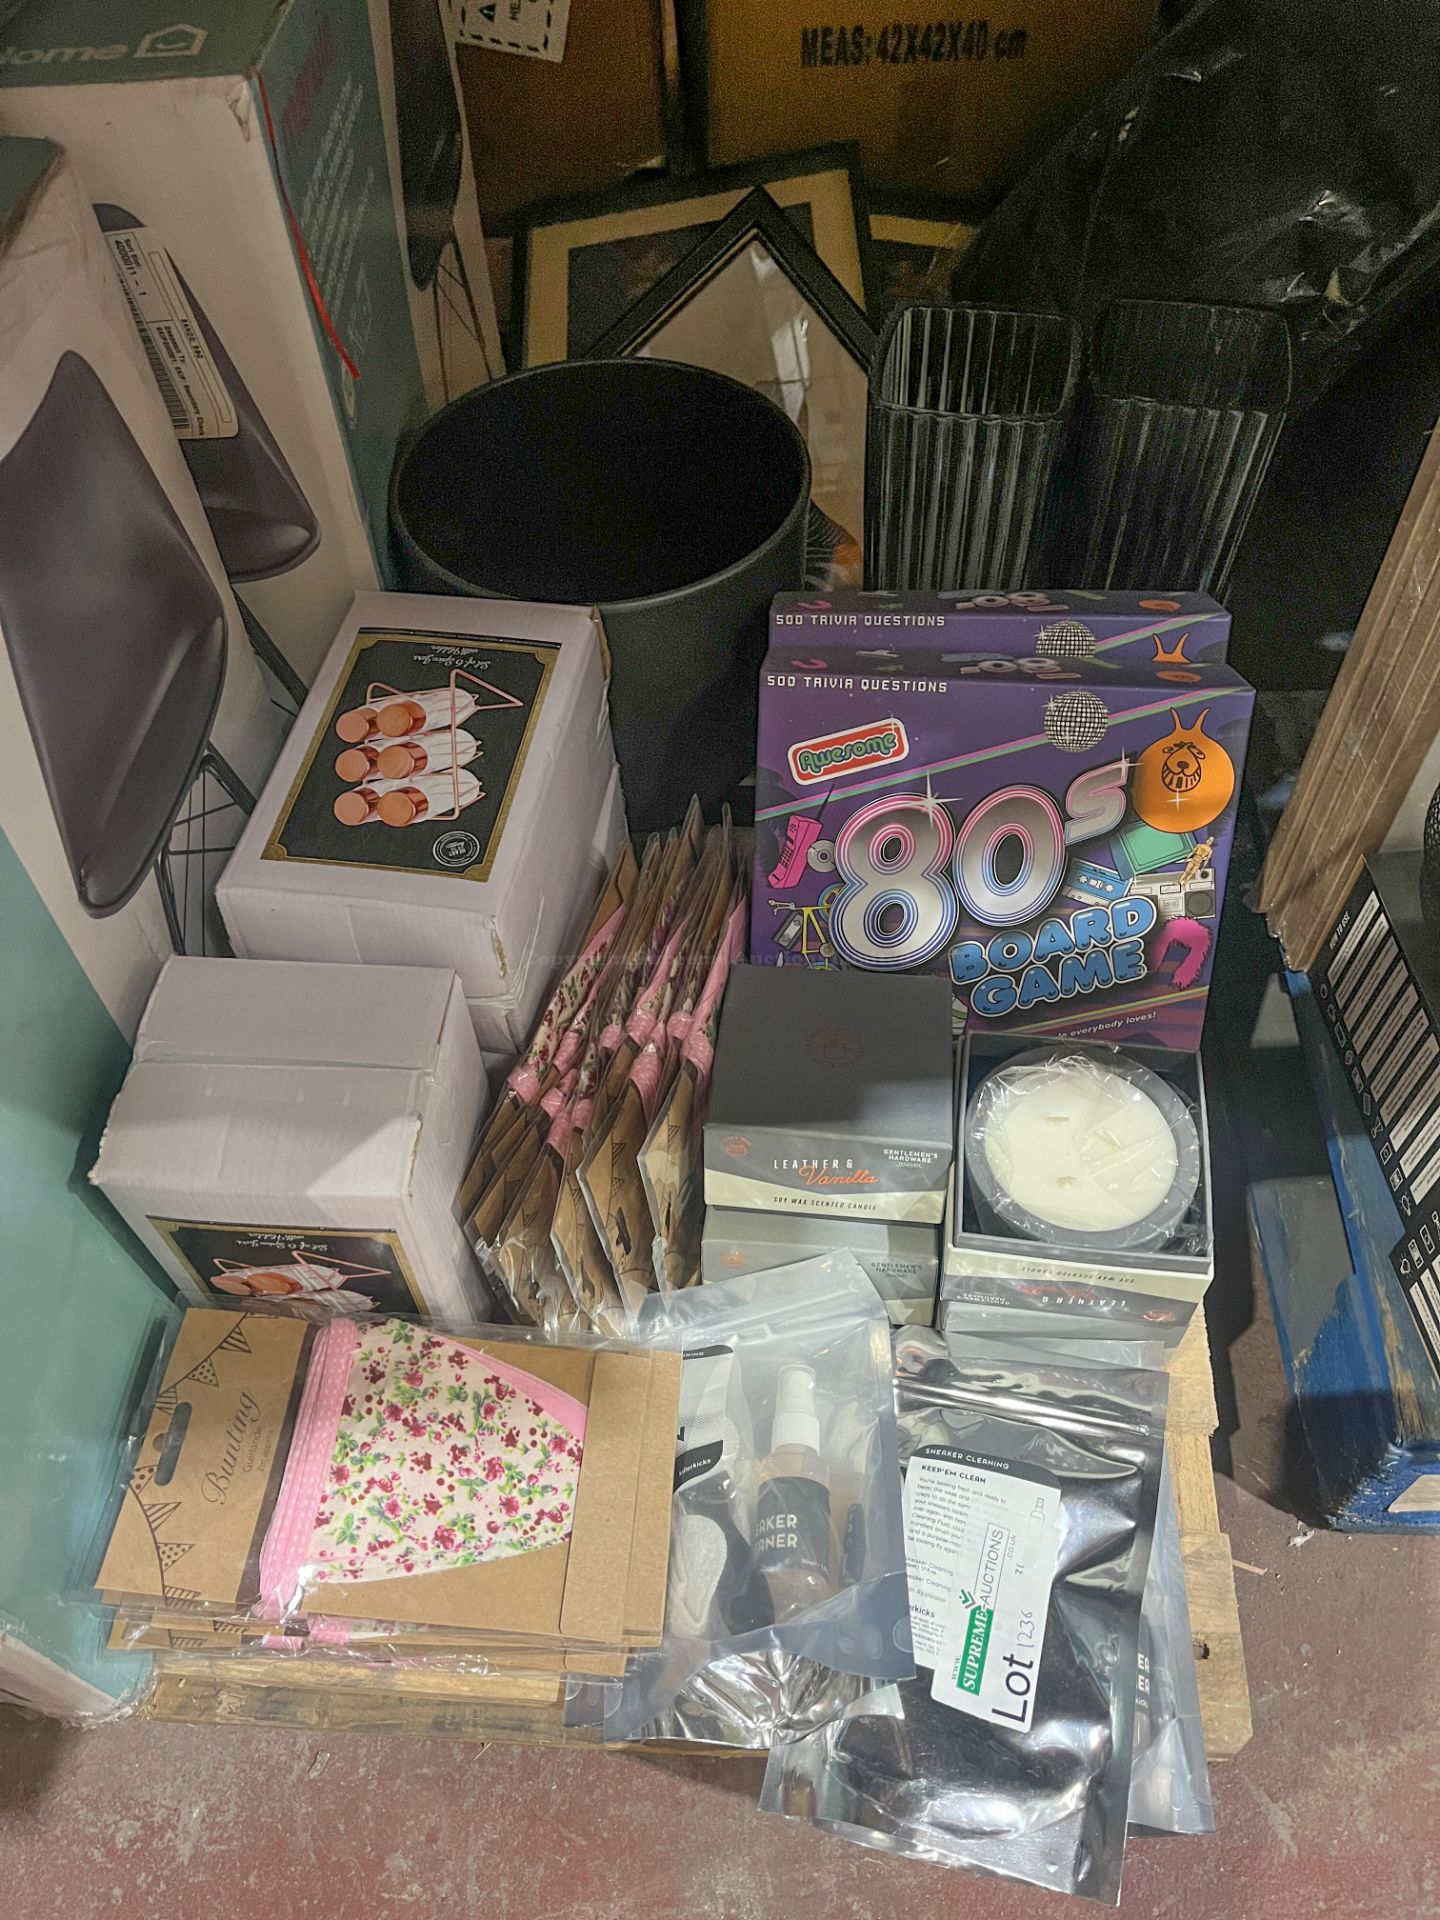 MIXED GIFTWARE LOT INCLUDING BOARD GAMES, PLANTERS, SNEAKER CLEANING KITS, CANDLES ETC R10-8